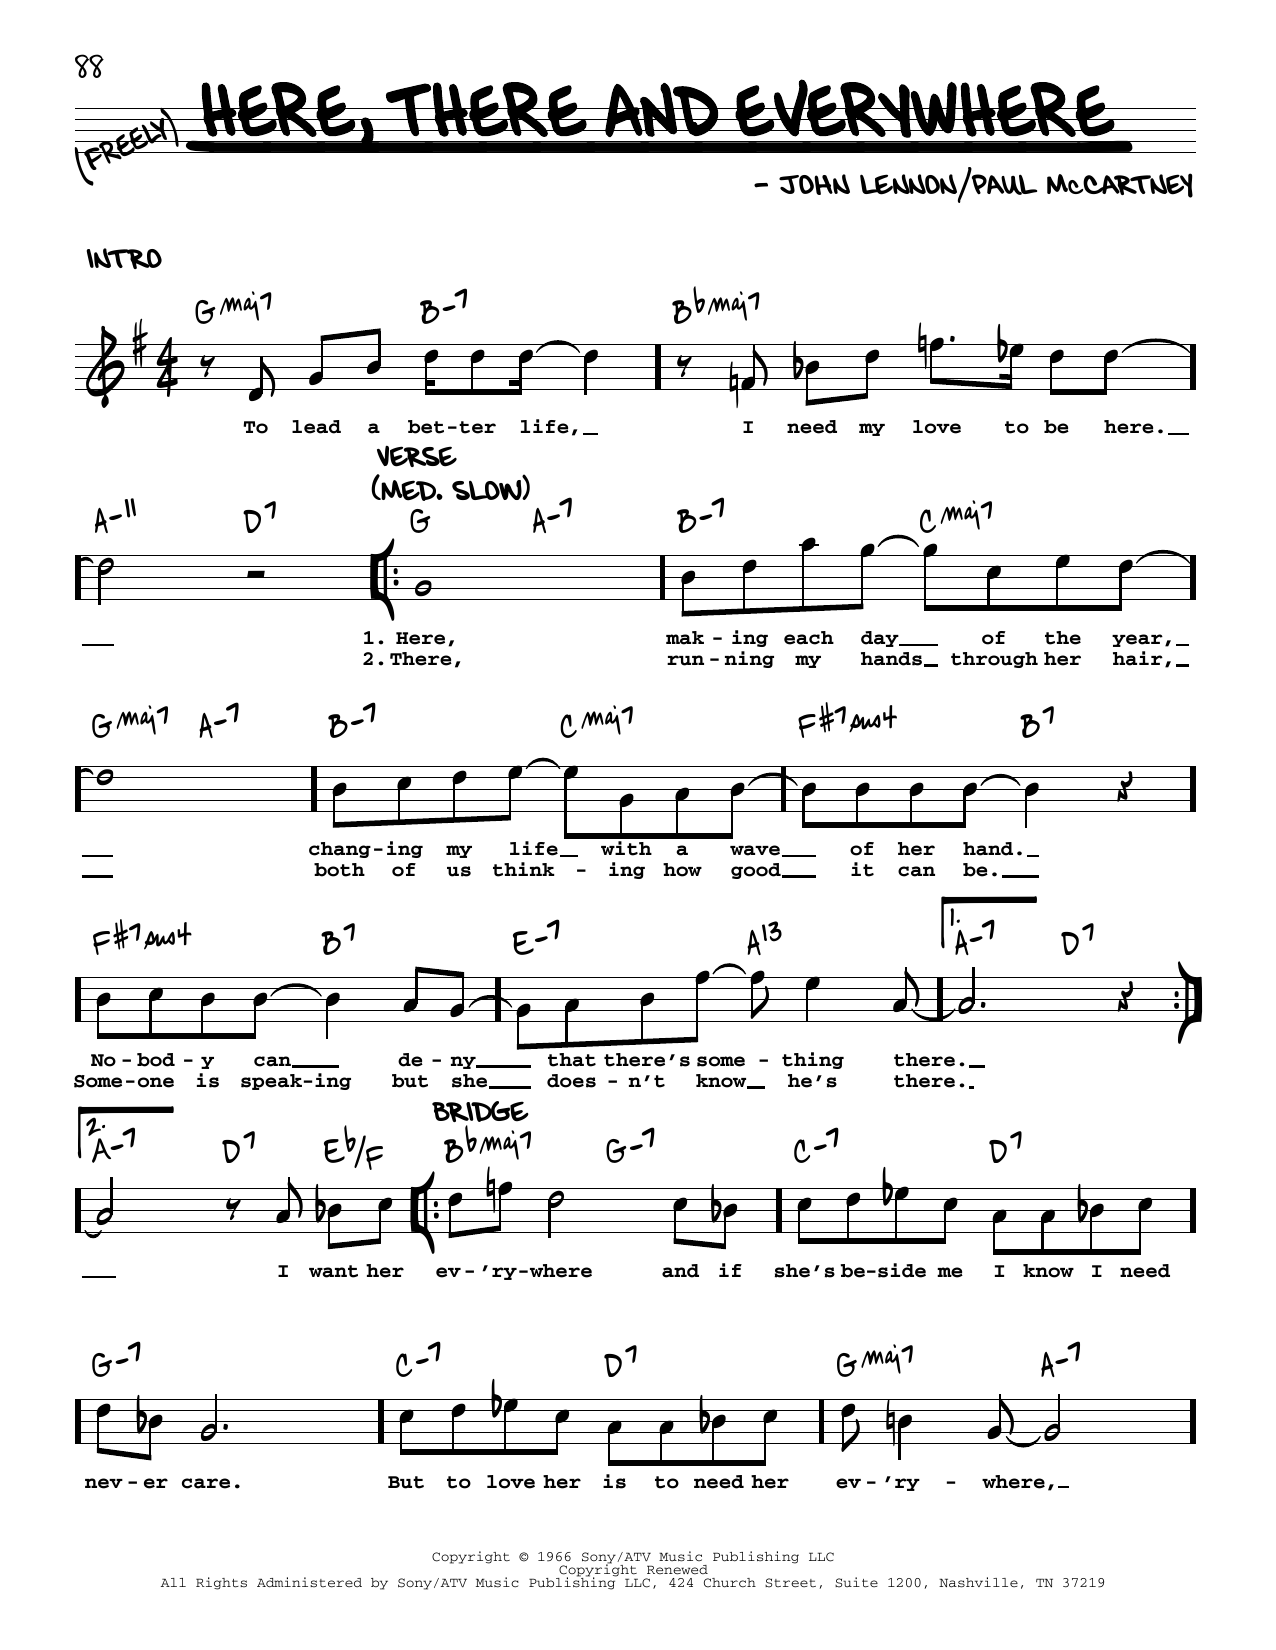 Download The Beatles Here, There And Everywhere [Jazz versio Sheet Music